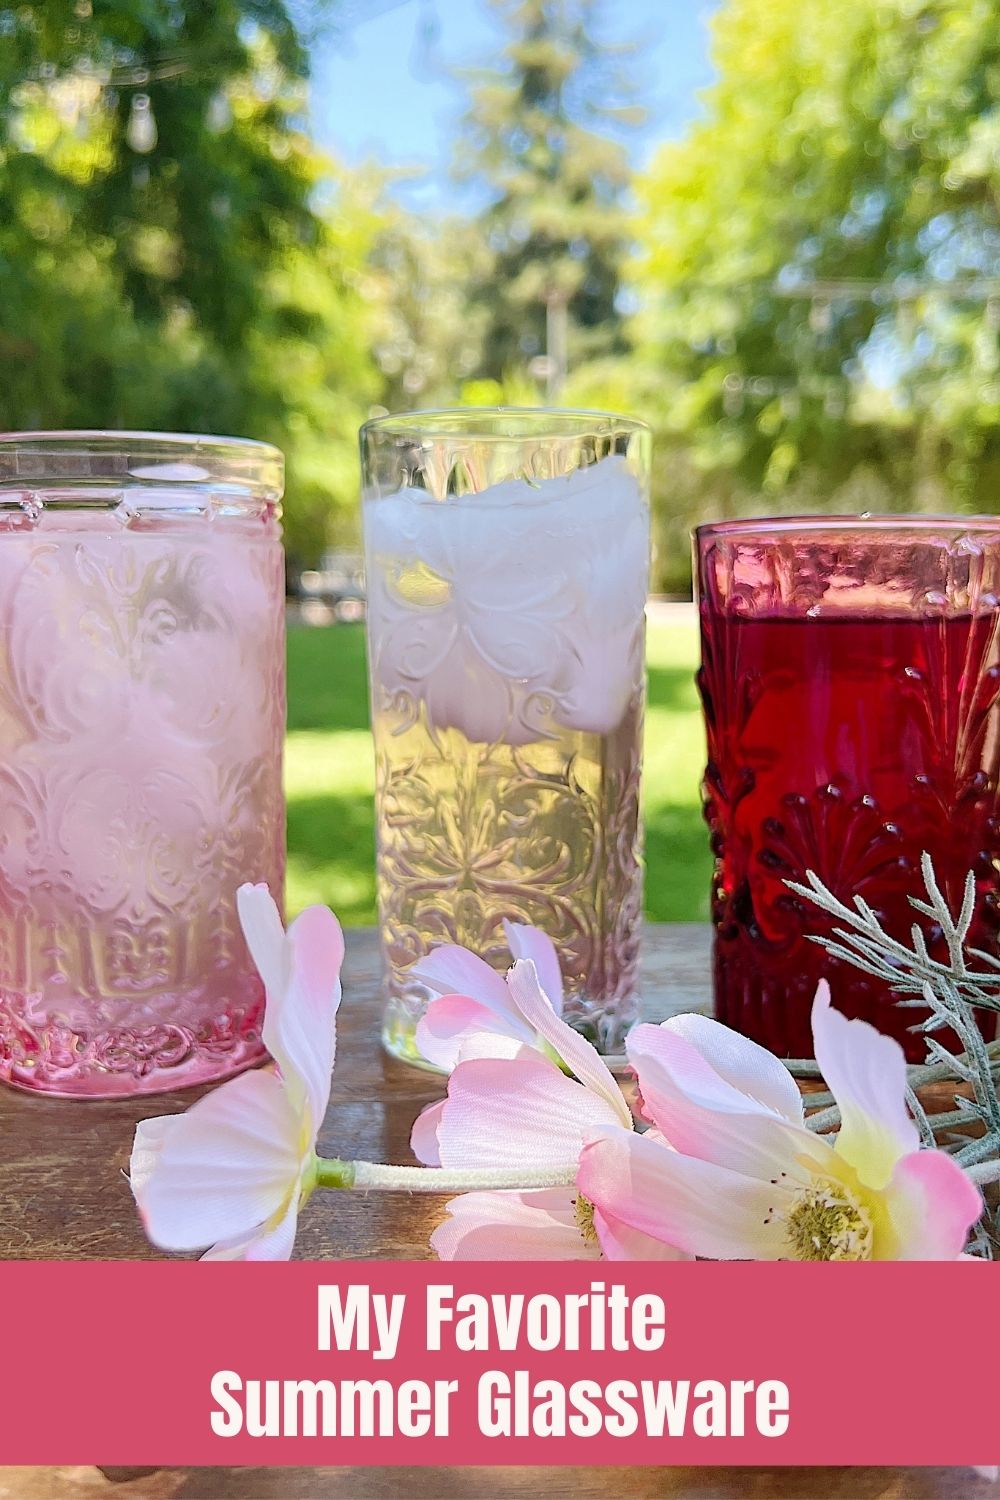 I have collected glassware for years. I have new and vintage glassware and today I am sharing my favorite Summer Glassware.